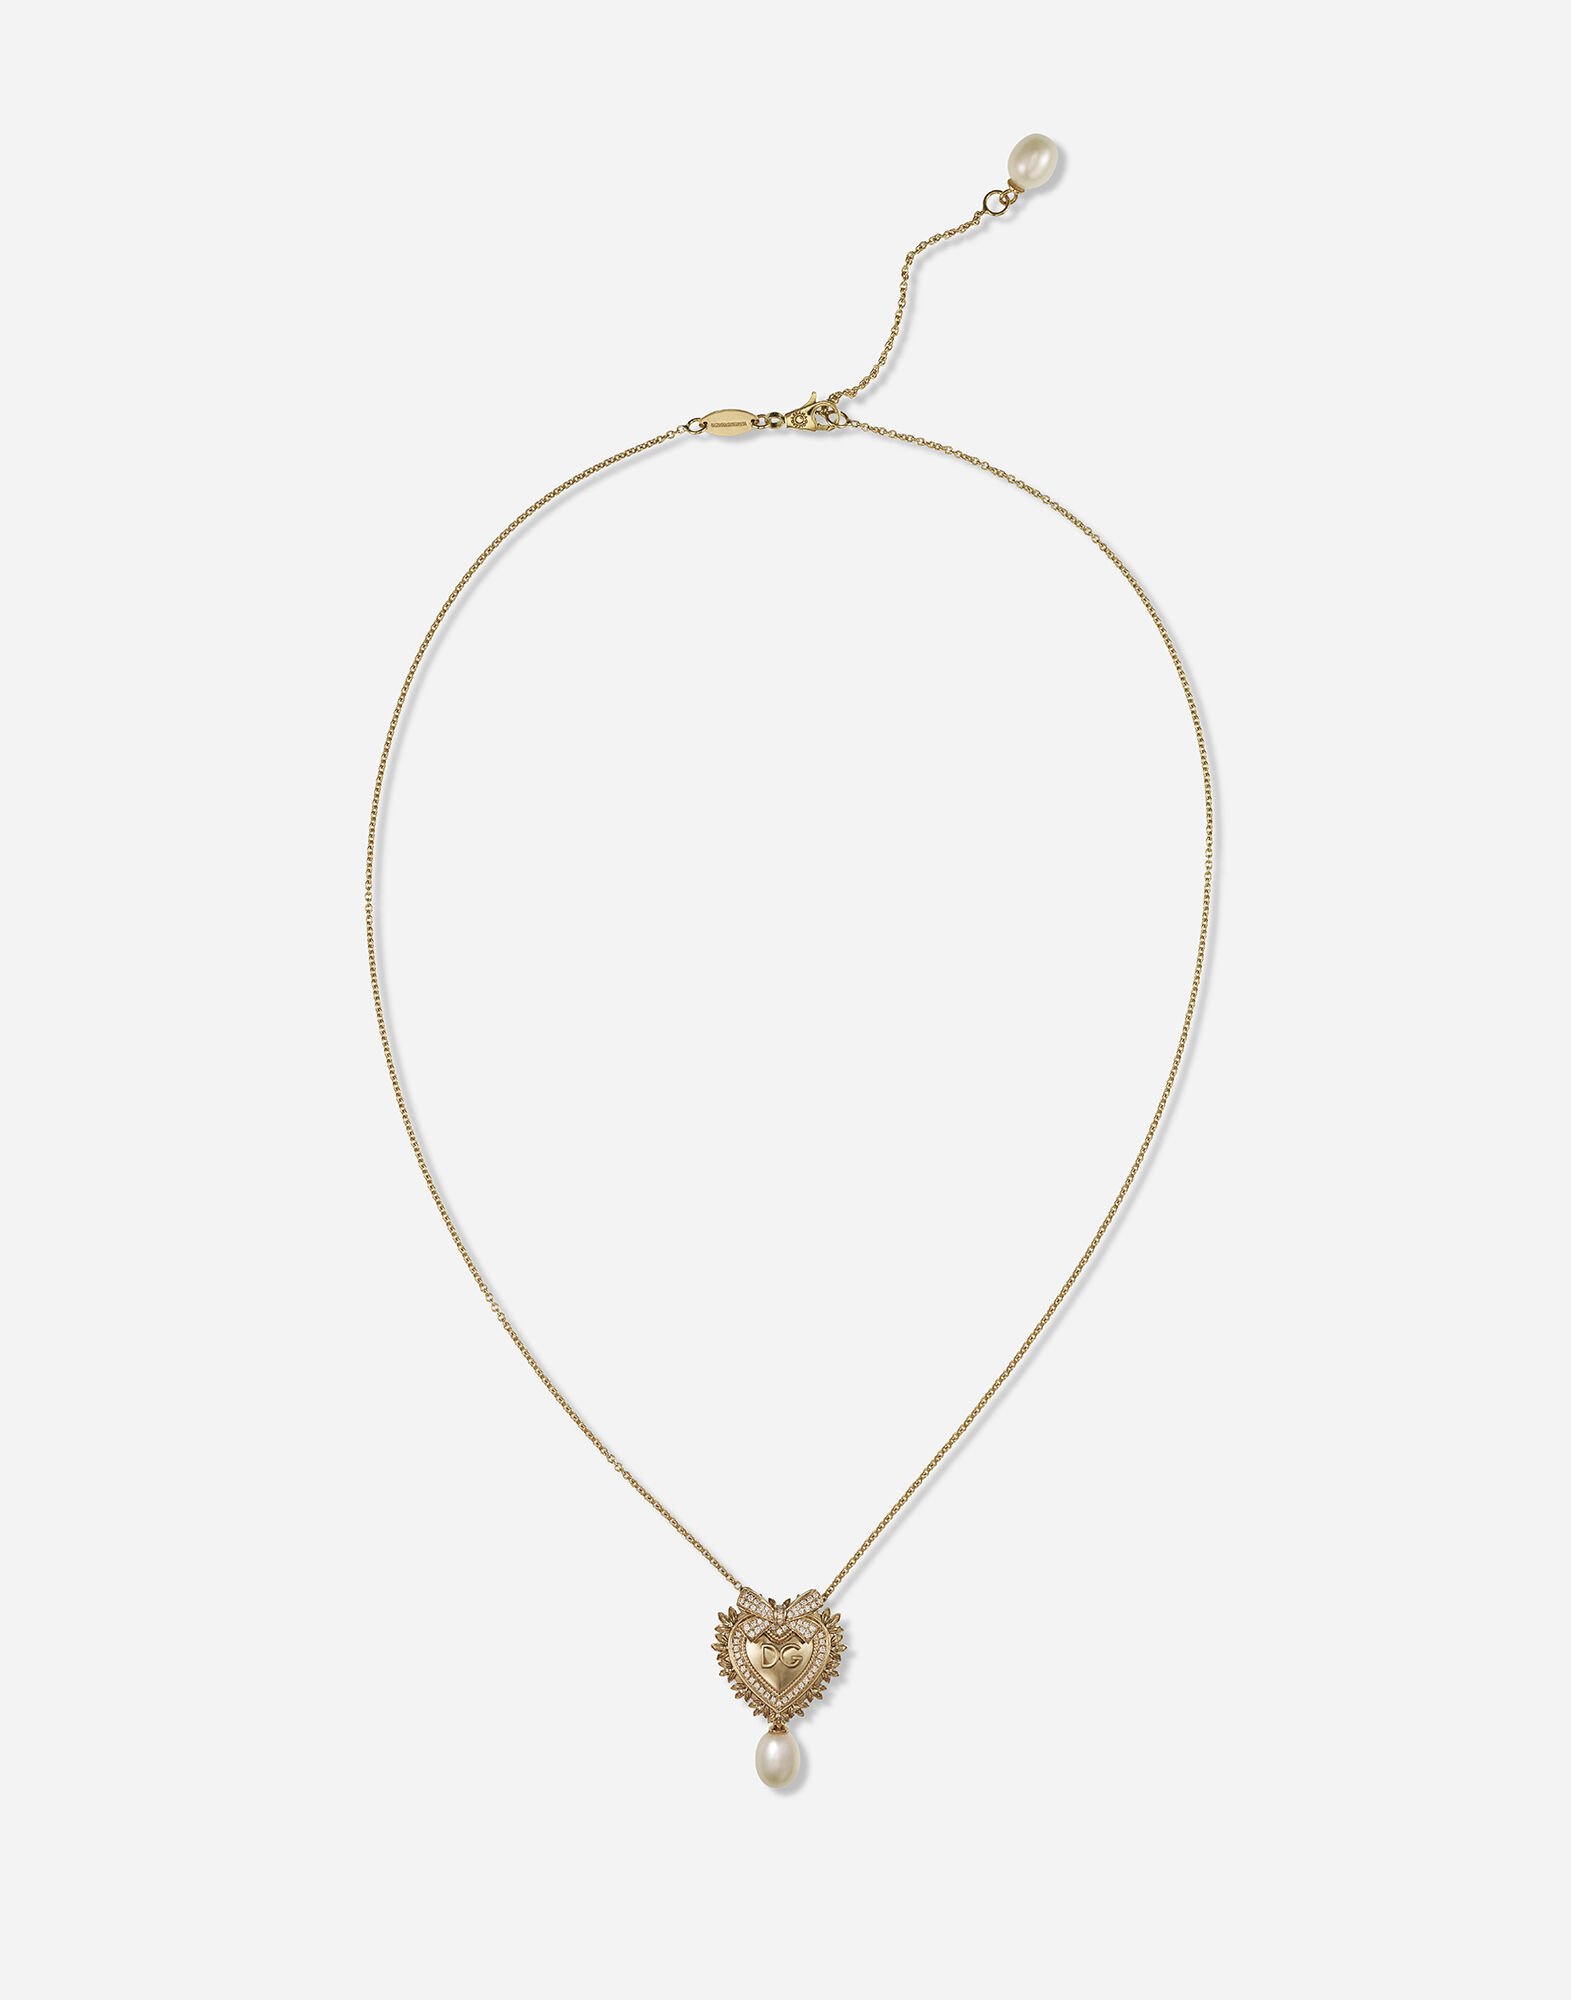 Dolce & Gabbana Devotion necklace in yellow gold with diamonds and pearls Gold WNDS3GWY2N1